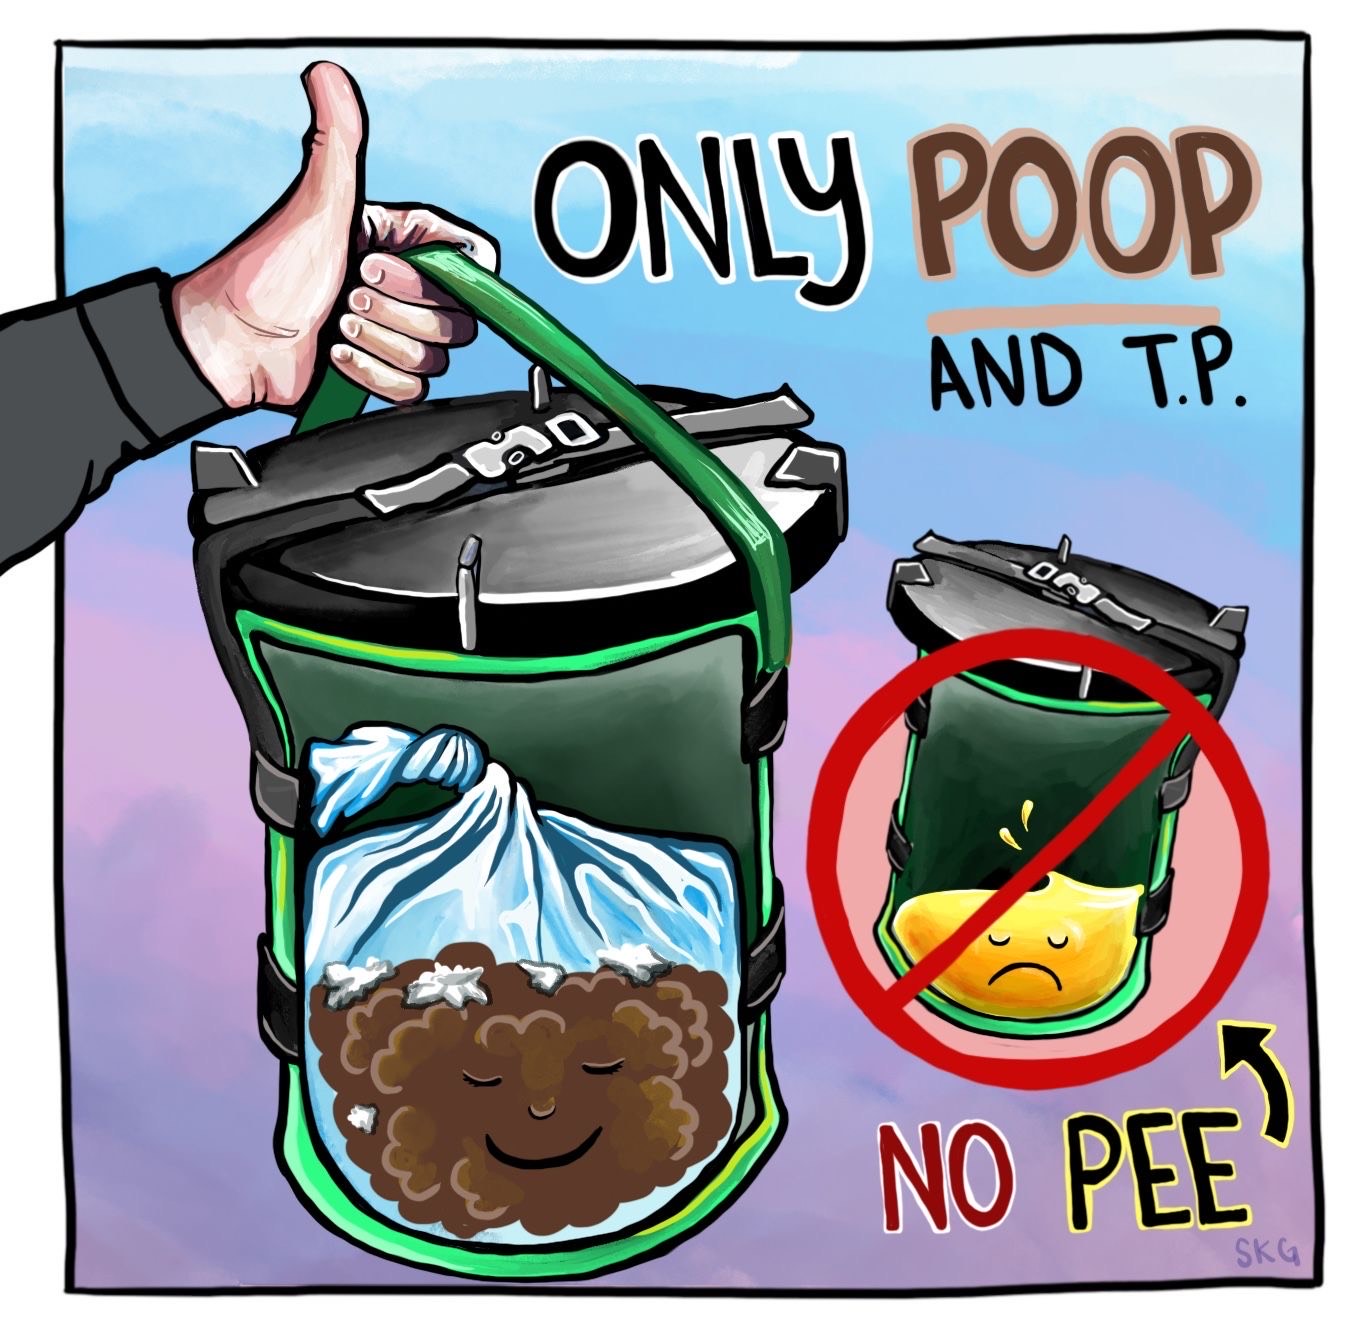 CMC graphic reminding only poop and TP, no pee